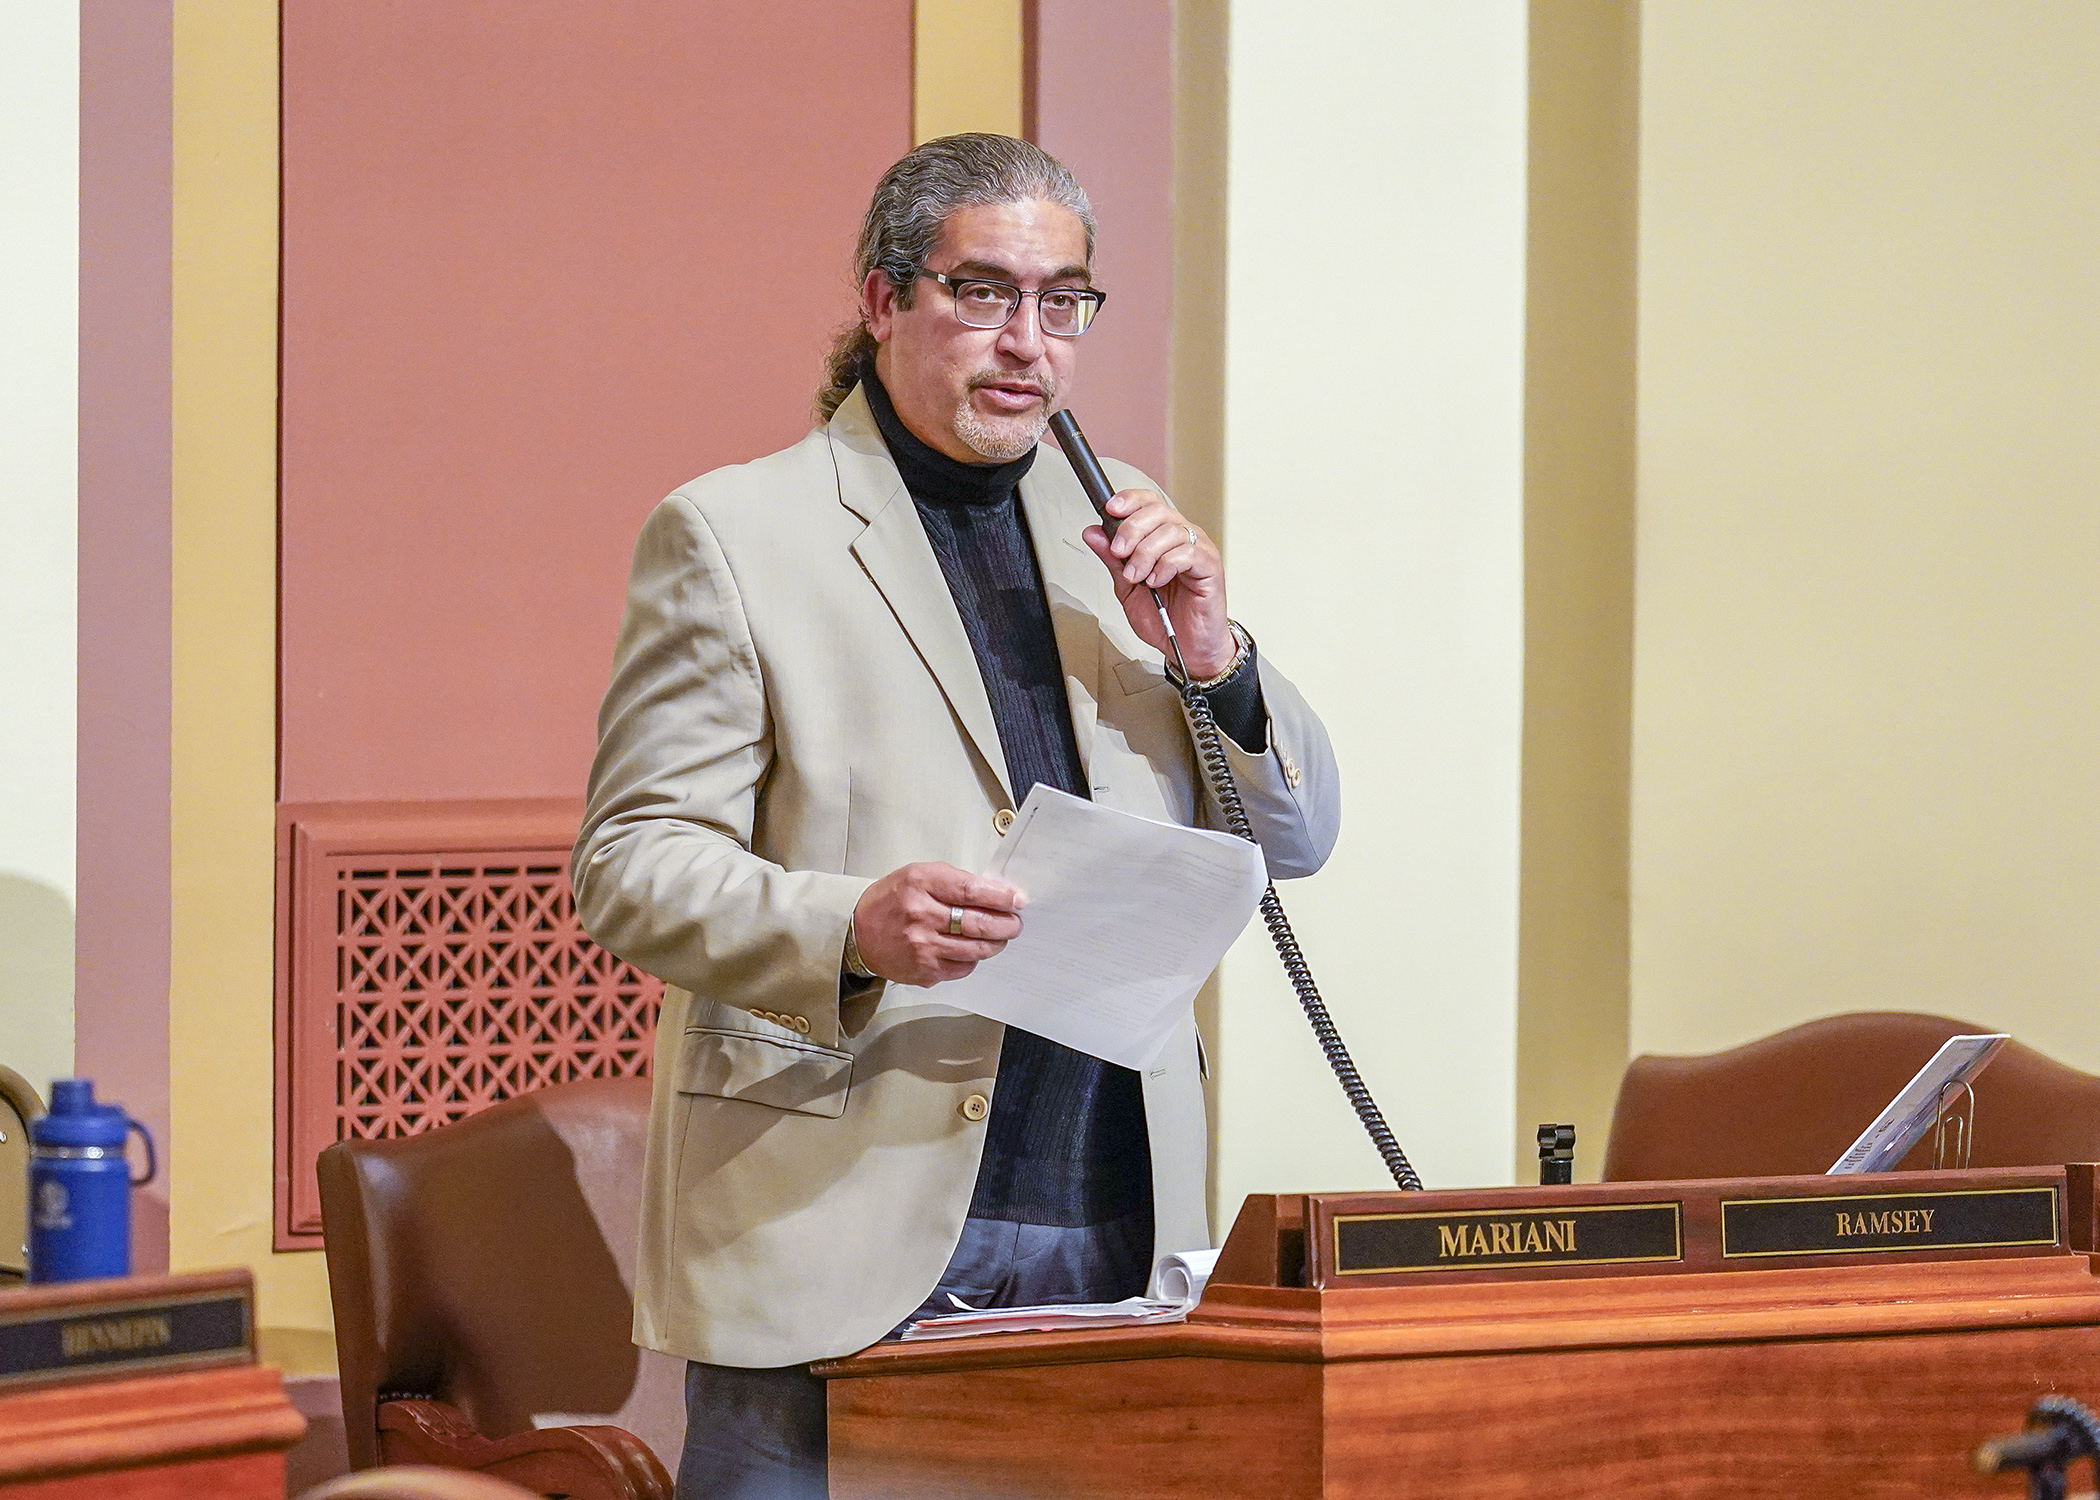 Rep. Carlos Mariani, chair of the House Public Safety and Criminal Justice Reform Finance and Policy Committee, makes opening comments on the omnibus judiciary and public safety supplemental finance and policy bill April 29. (Photo by Andrew VonBank)